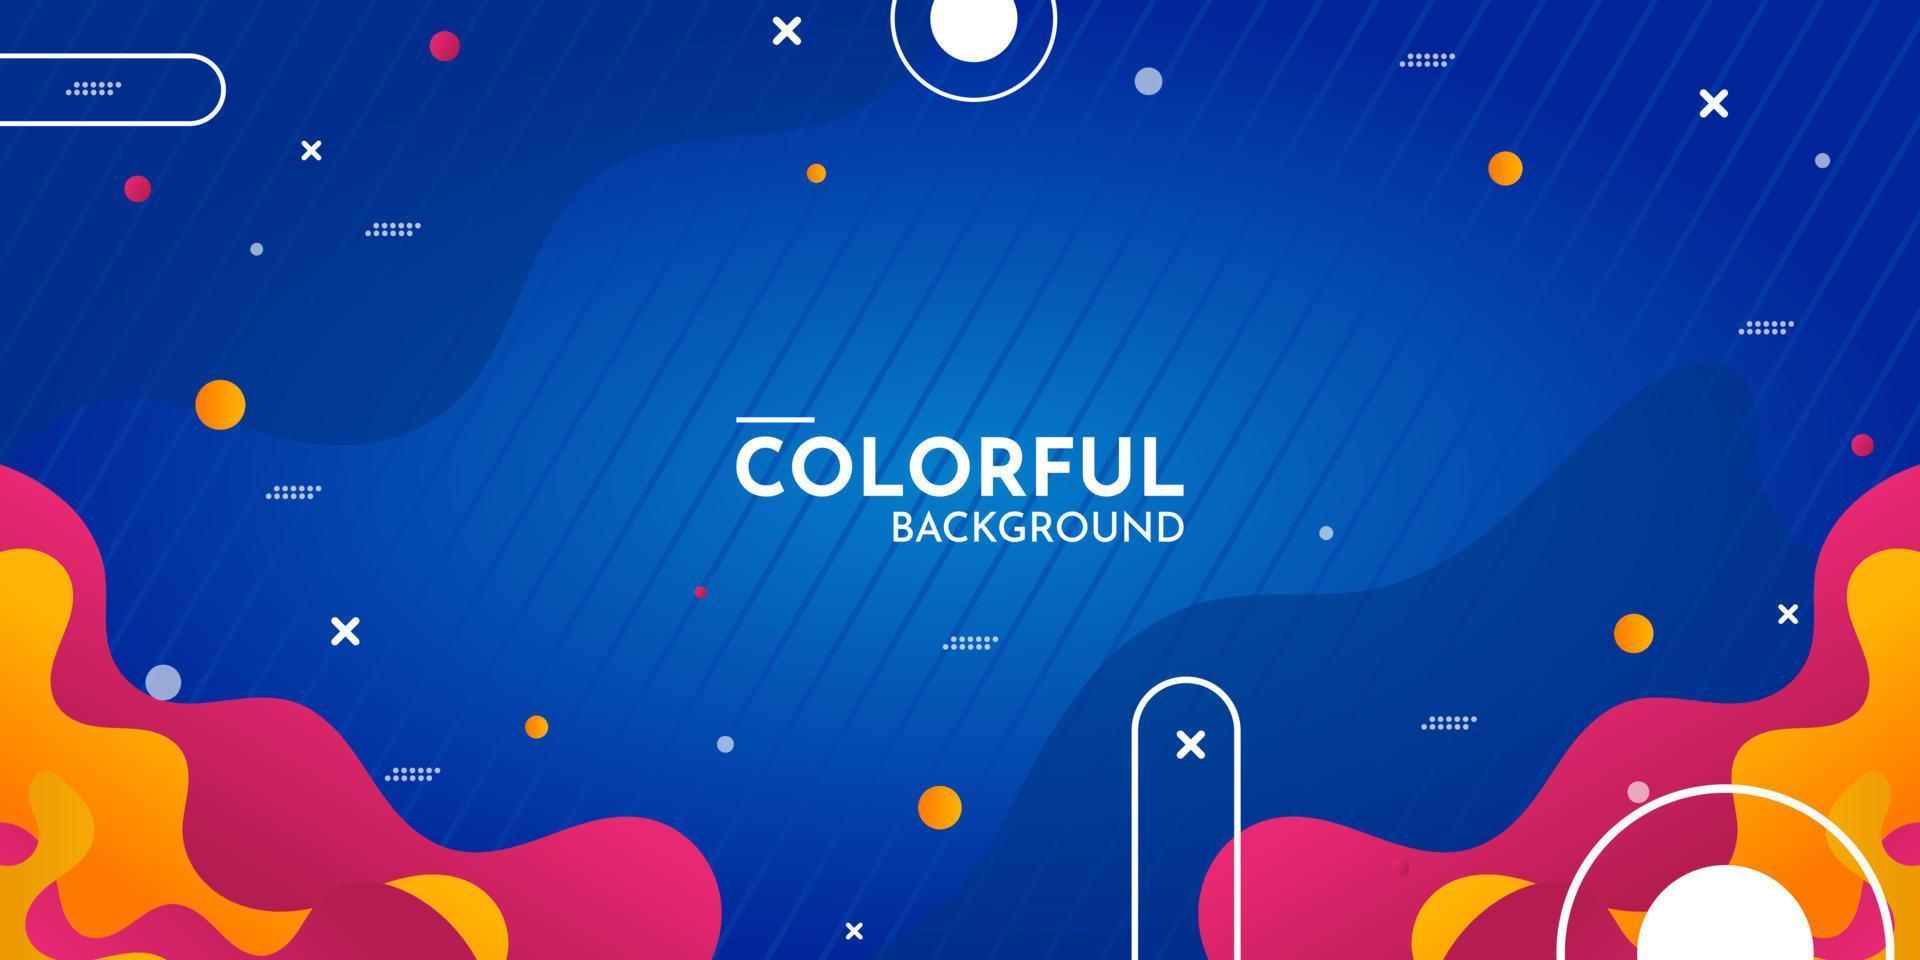 Abstract colorful shapes background design vector